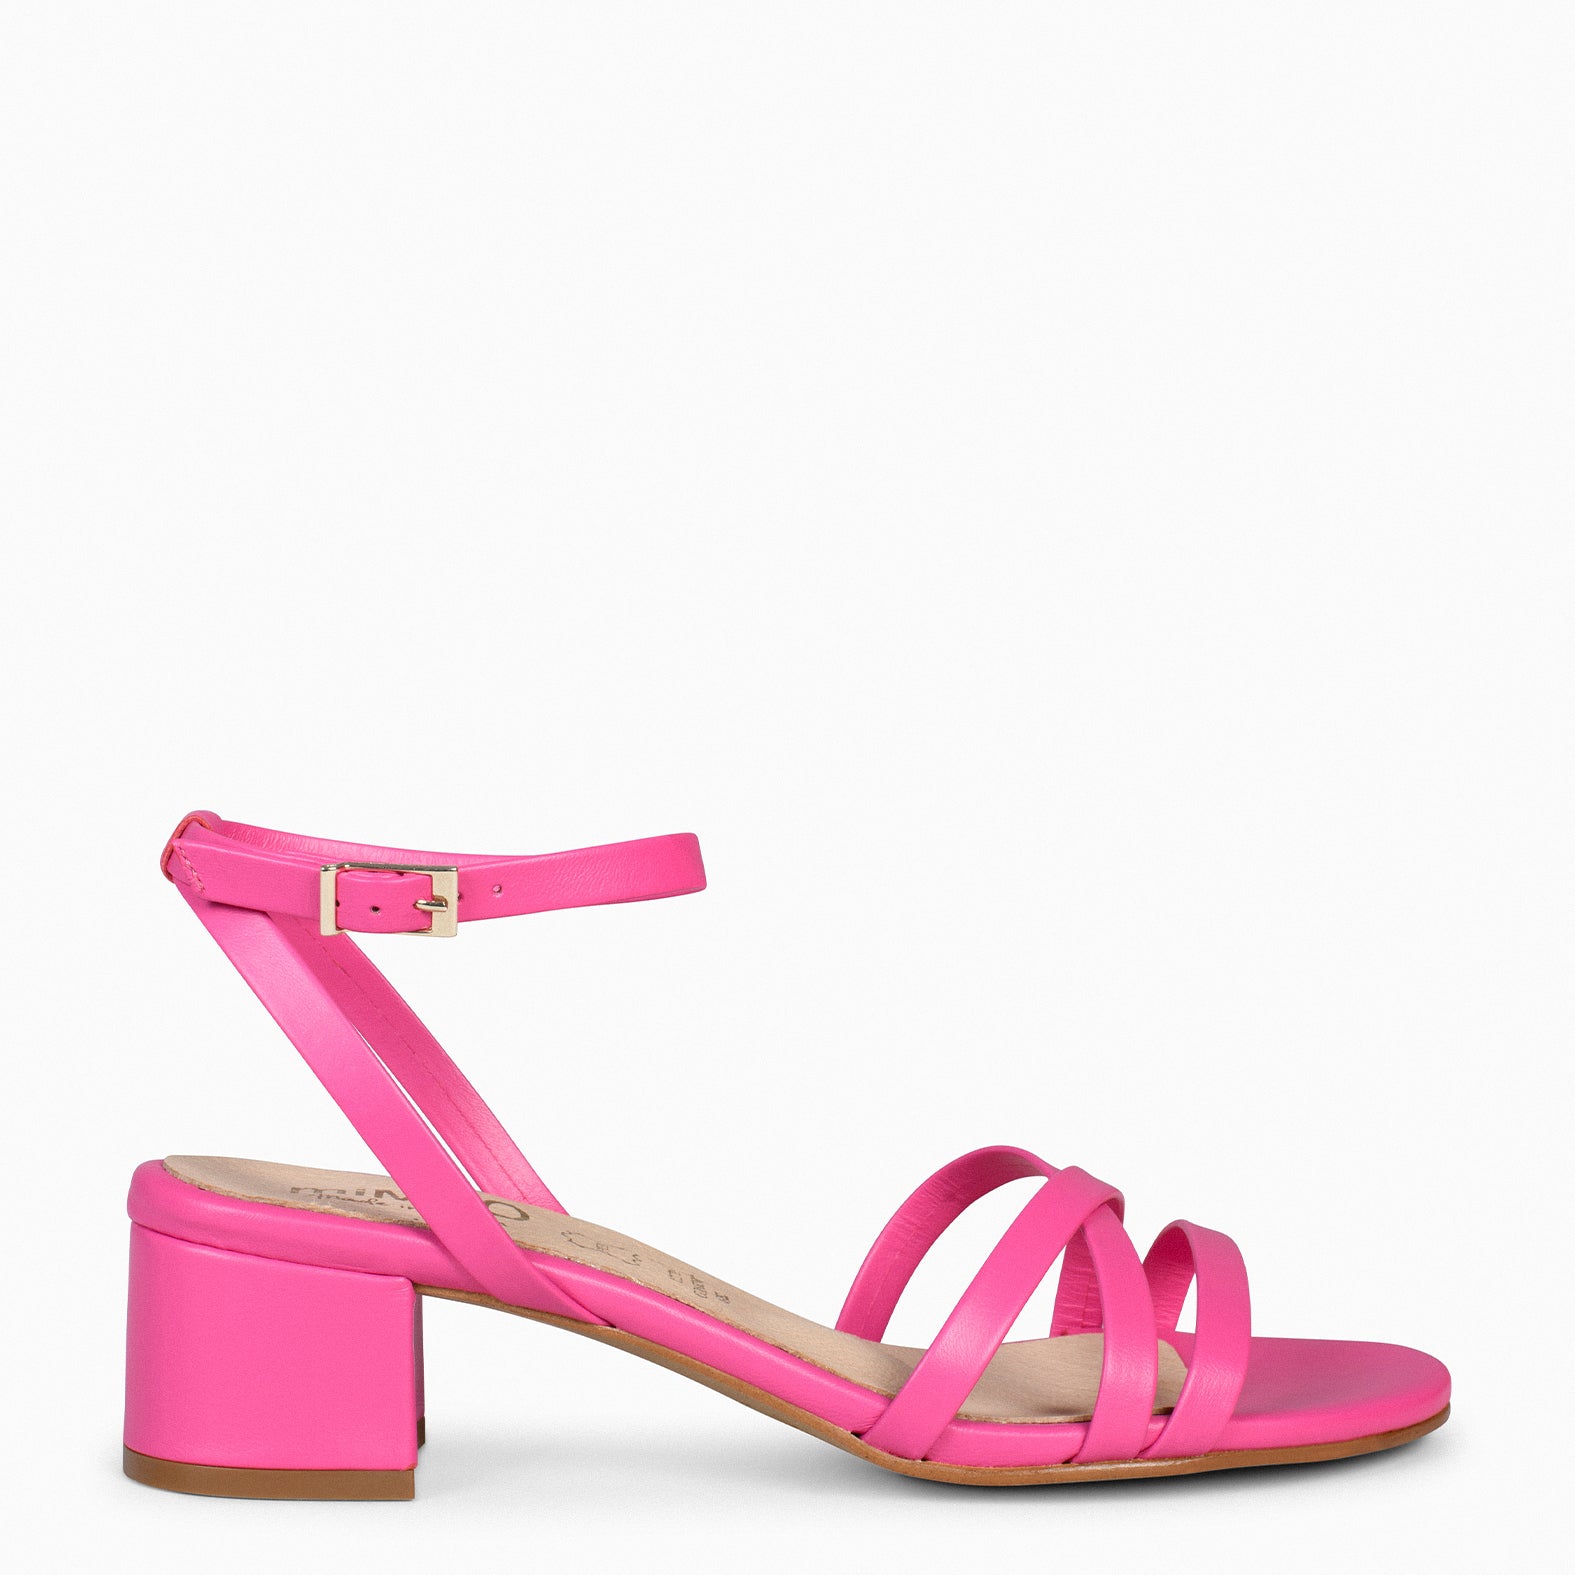 VIENA – PINK SANDAL WITH THIN STRAPS AND LOW HEEL